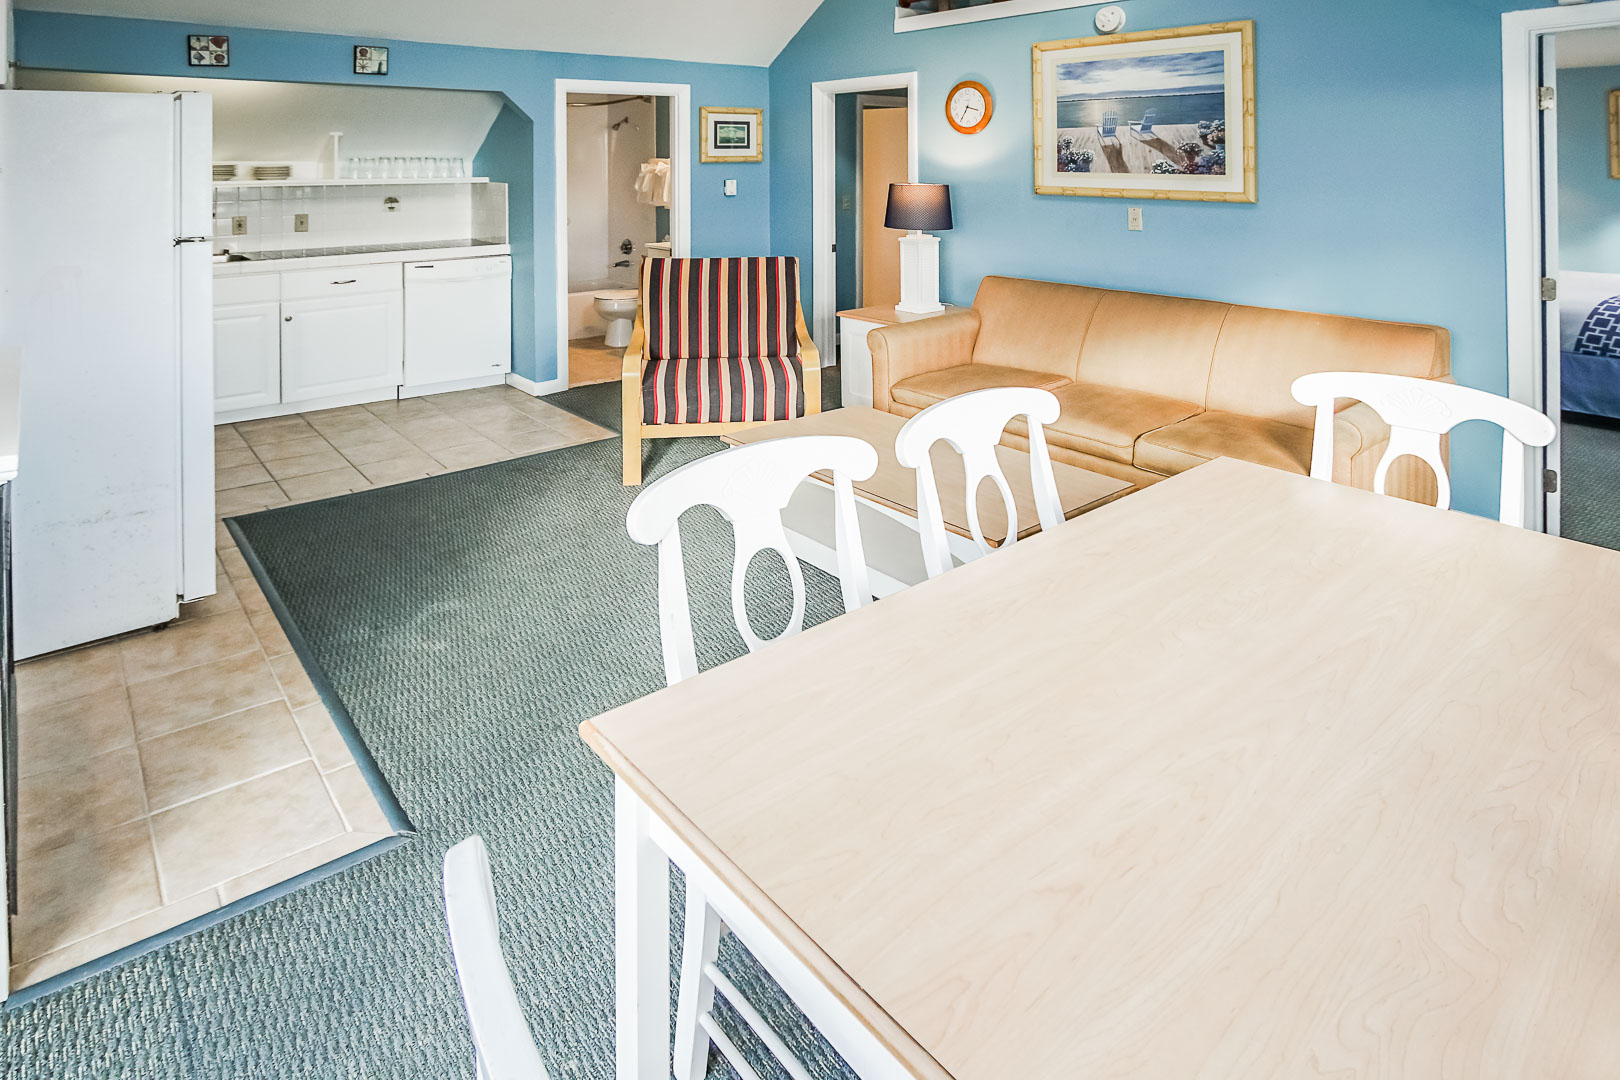 A cozy living and dining room area, equipped with a kitchenette at VRI's Seawinds II Resort in Massachusetts.